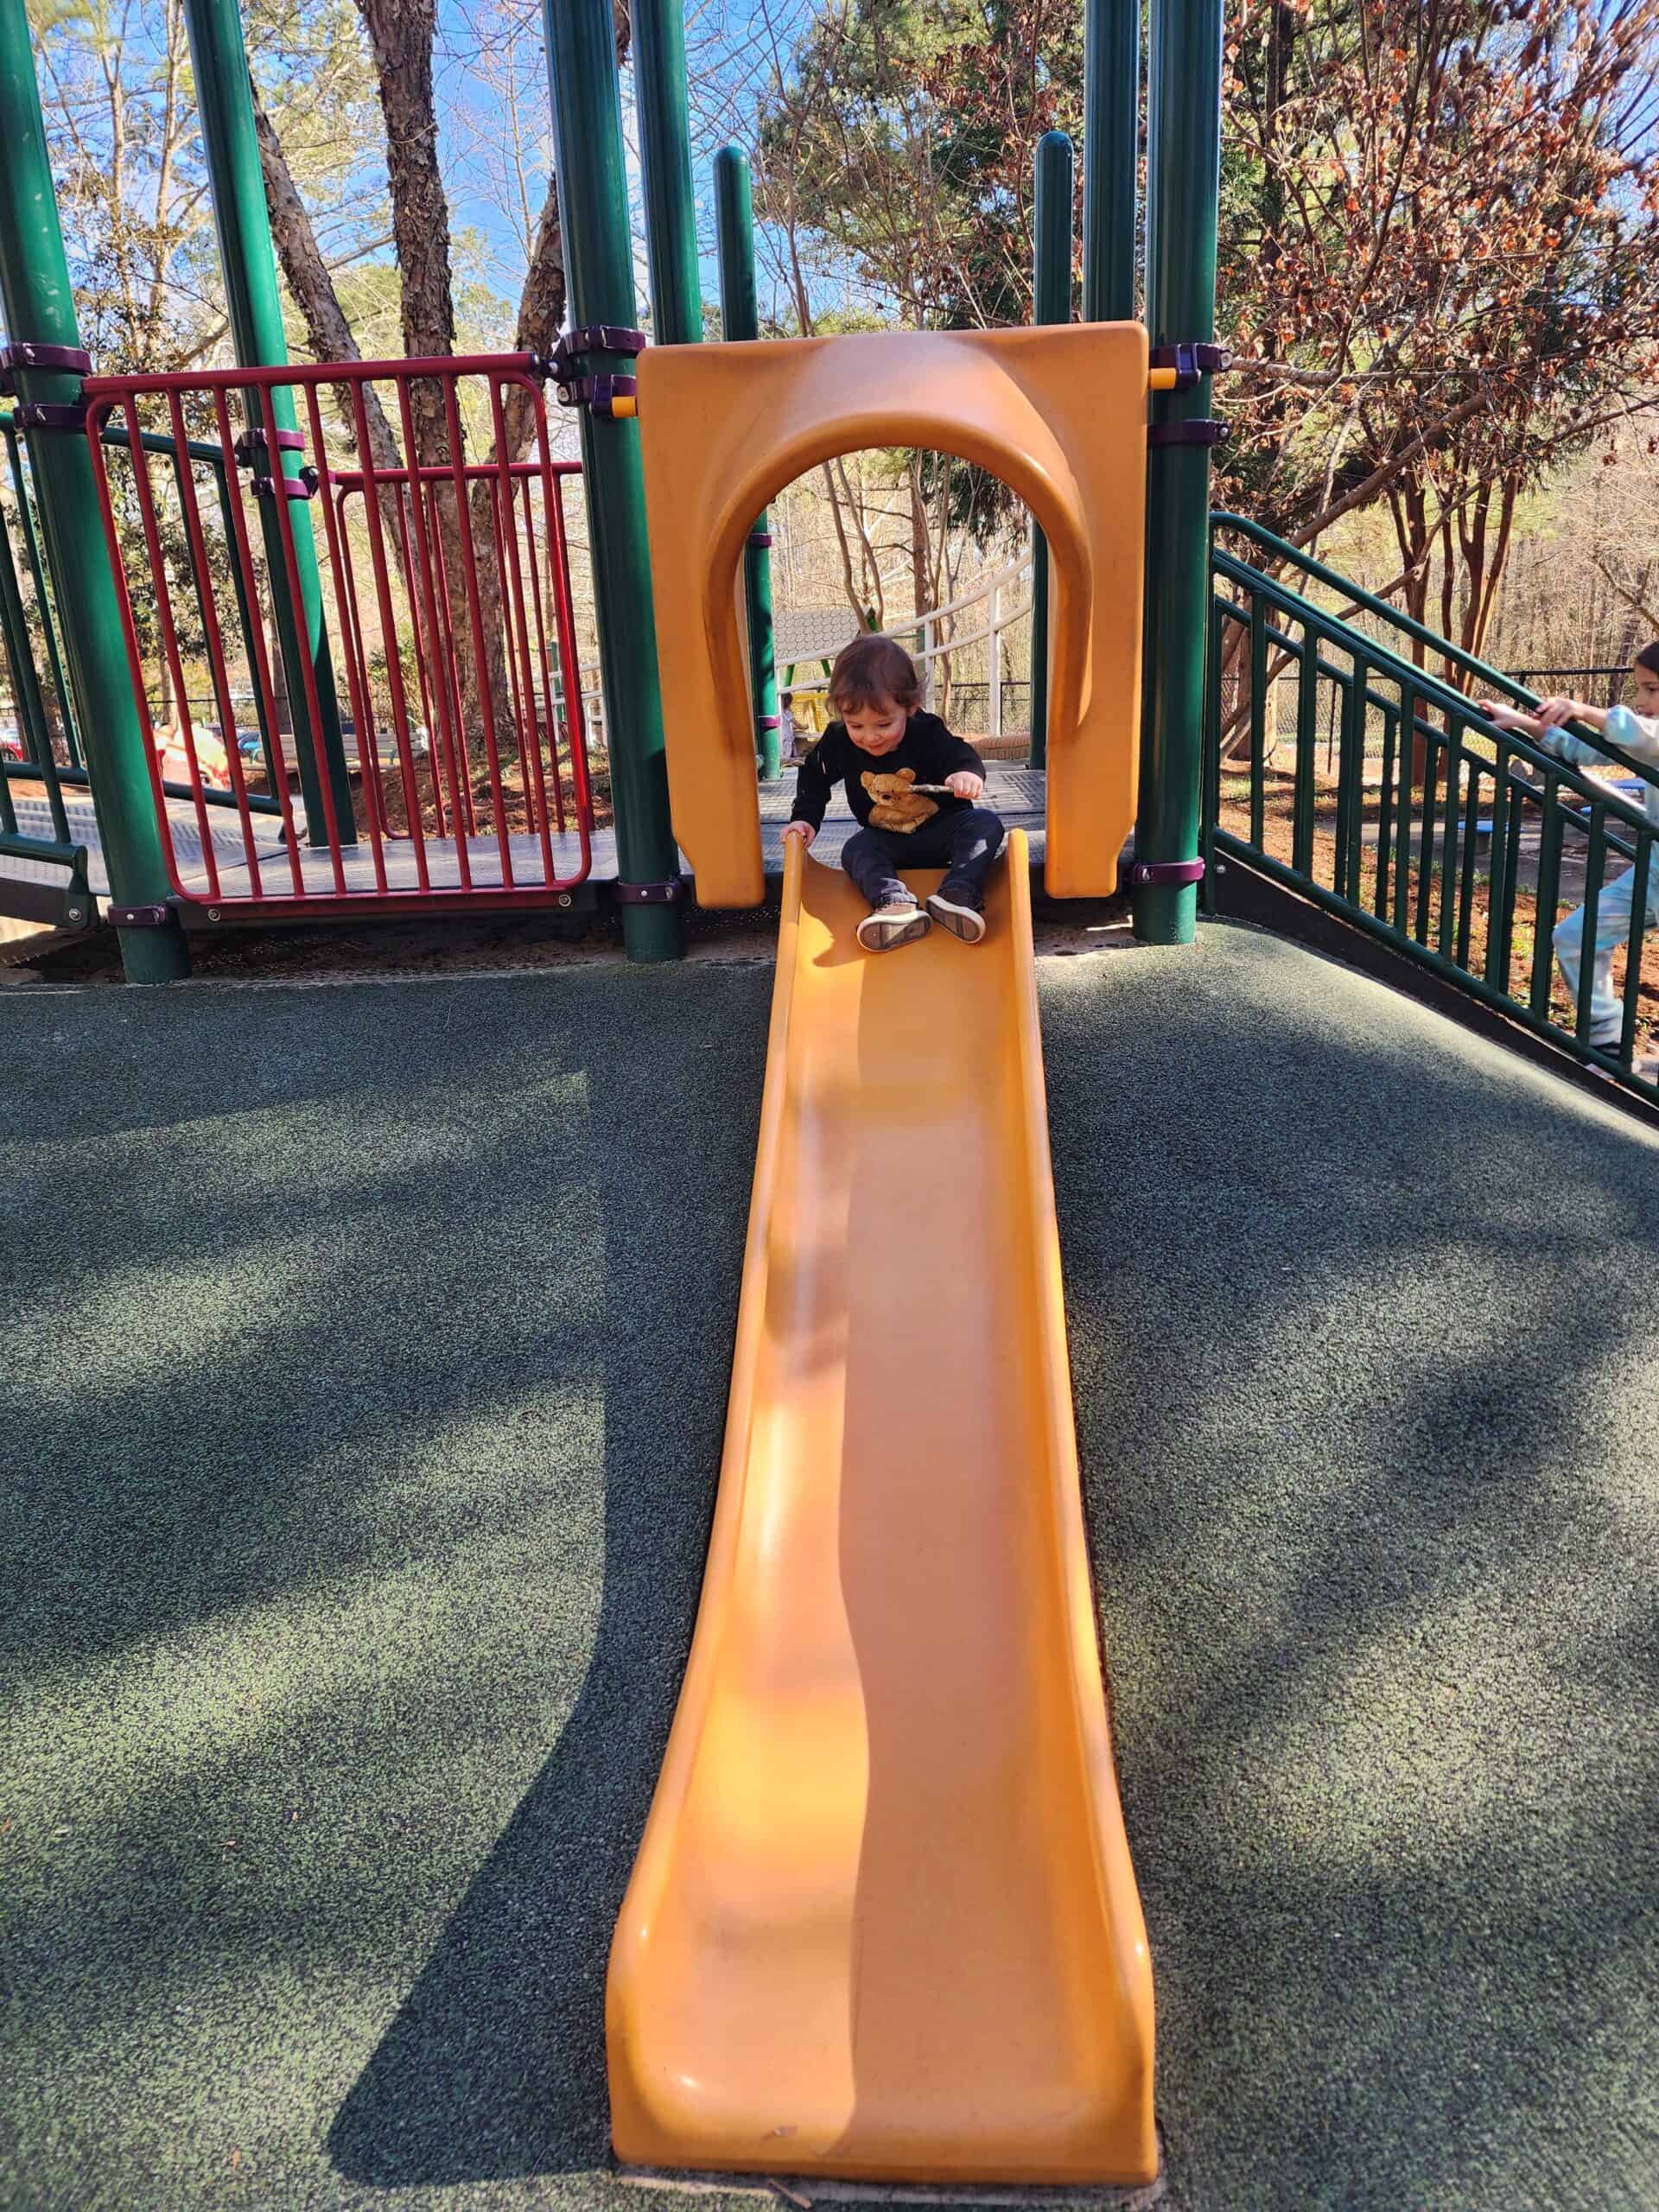 A delighted child with a teddy bear on their sweater pauses at the top of a bright orange slide, ready for fun at a Cary, North Carolina playground. The sturdy green railings and surrounding trees create a safe and natural play environment on a sunny day